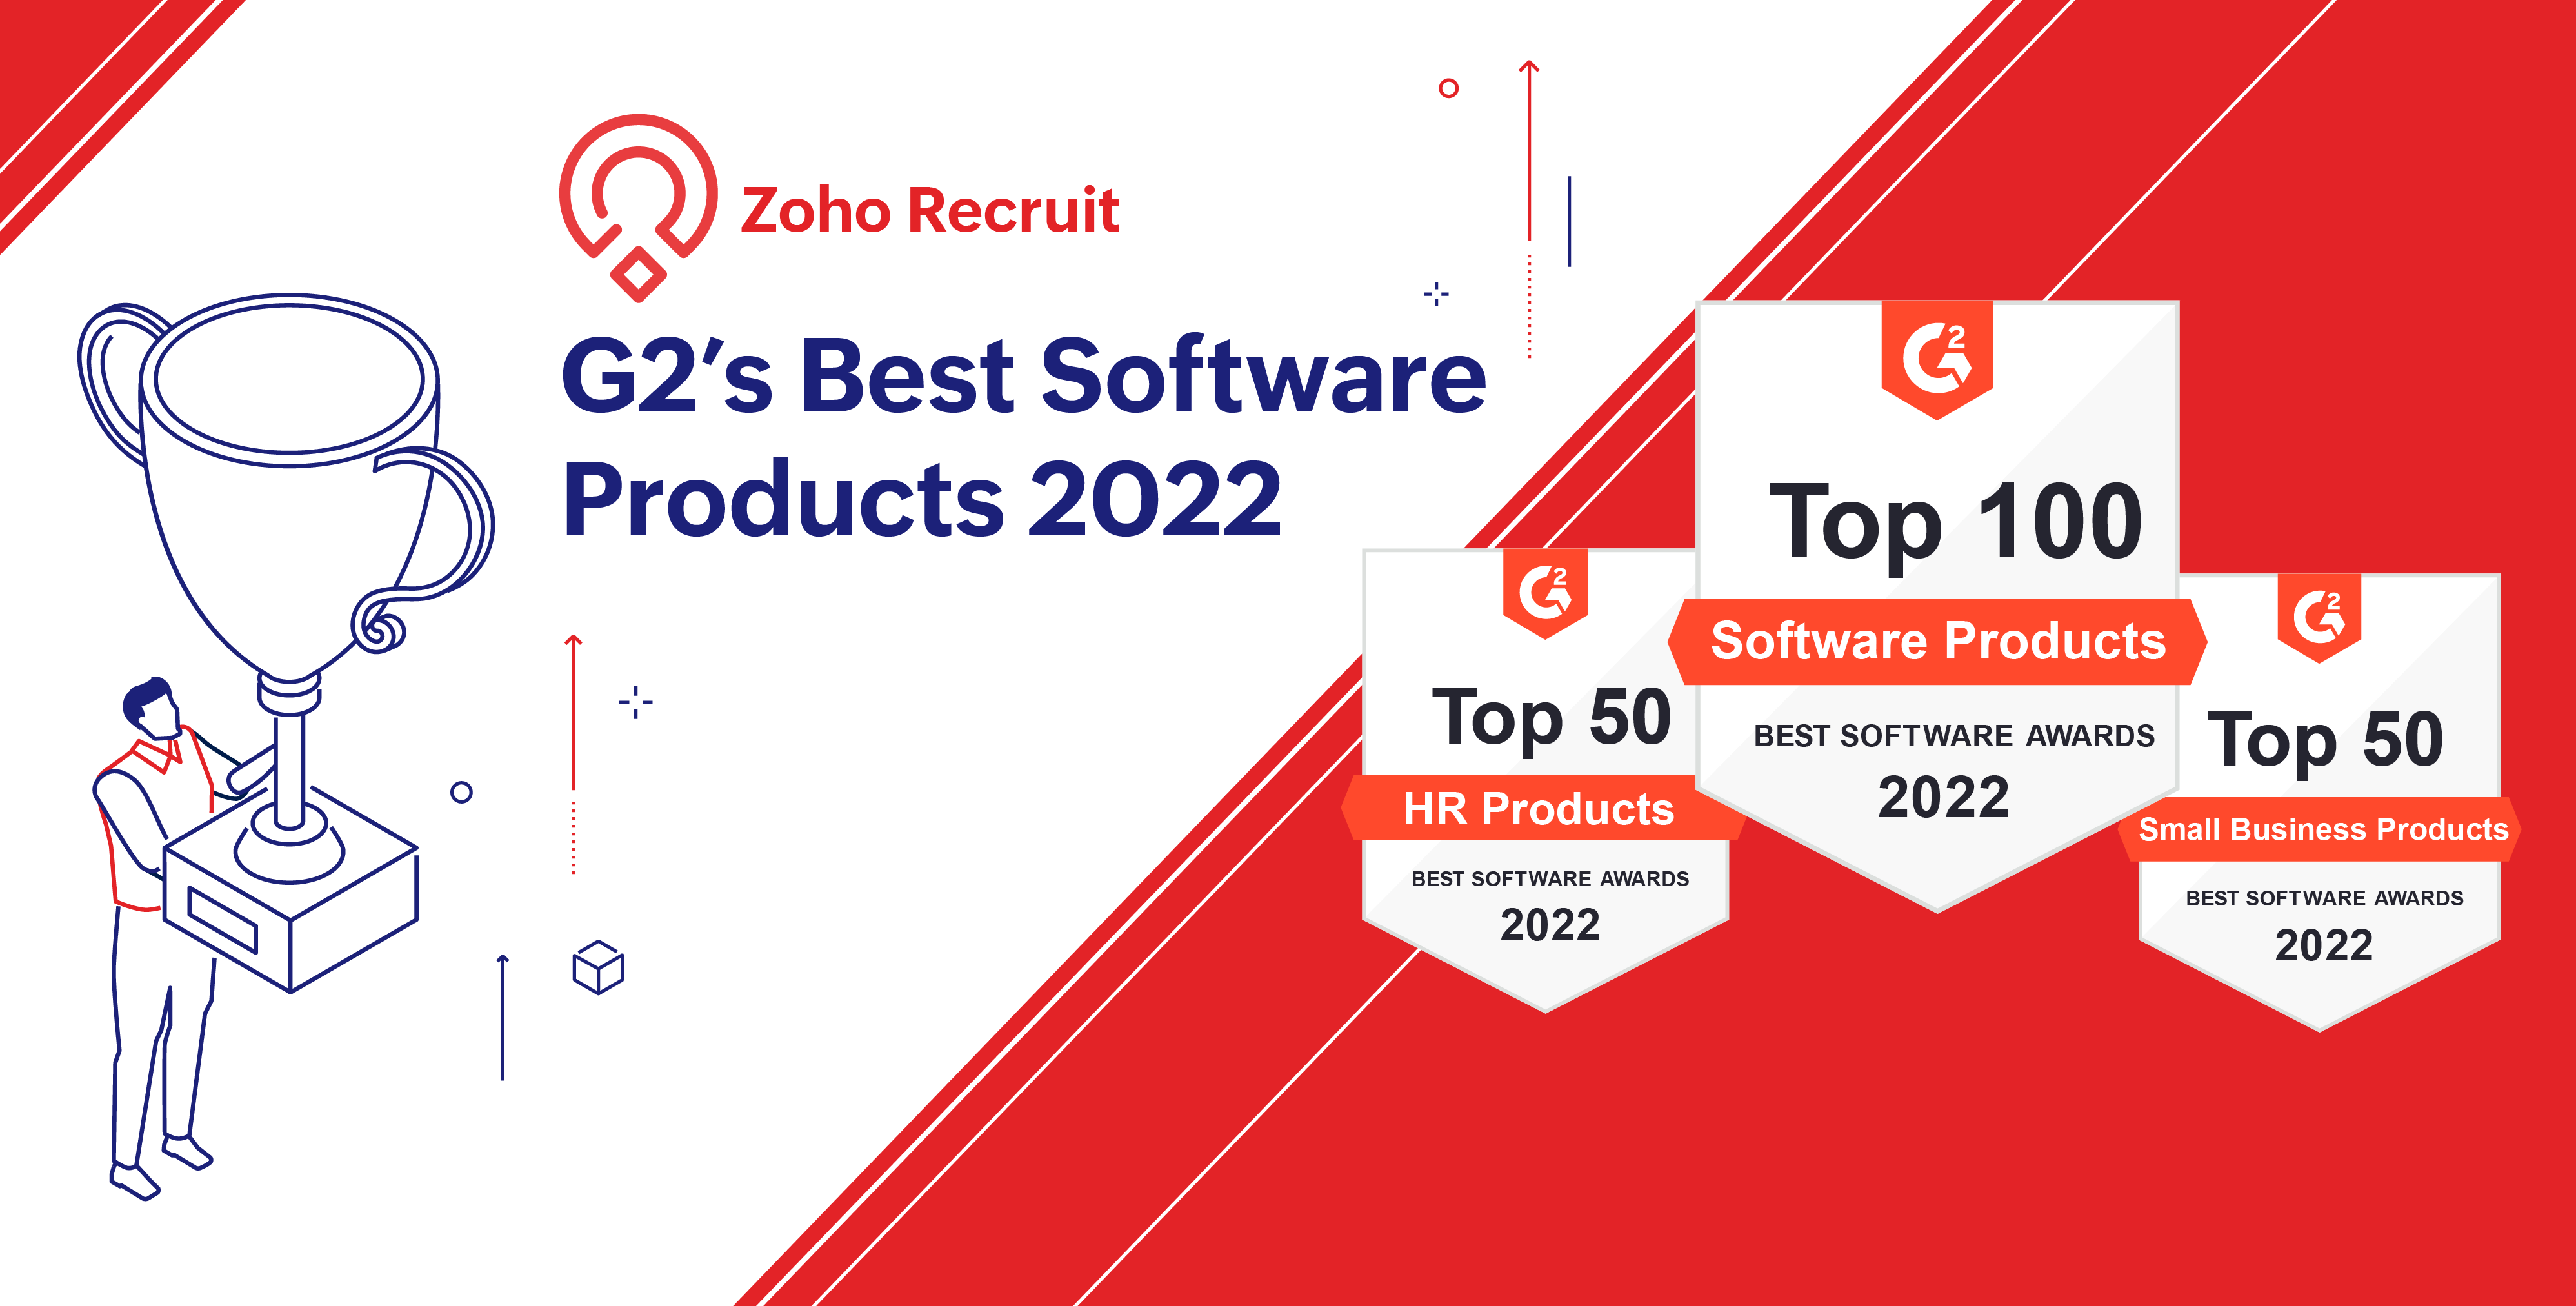  Zoho Recruit: G2's best software products of 2022 